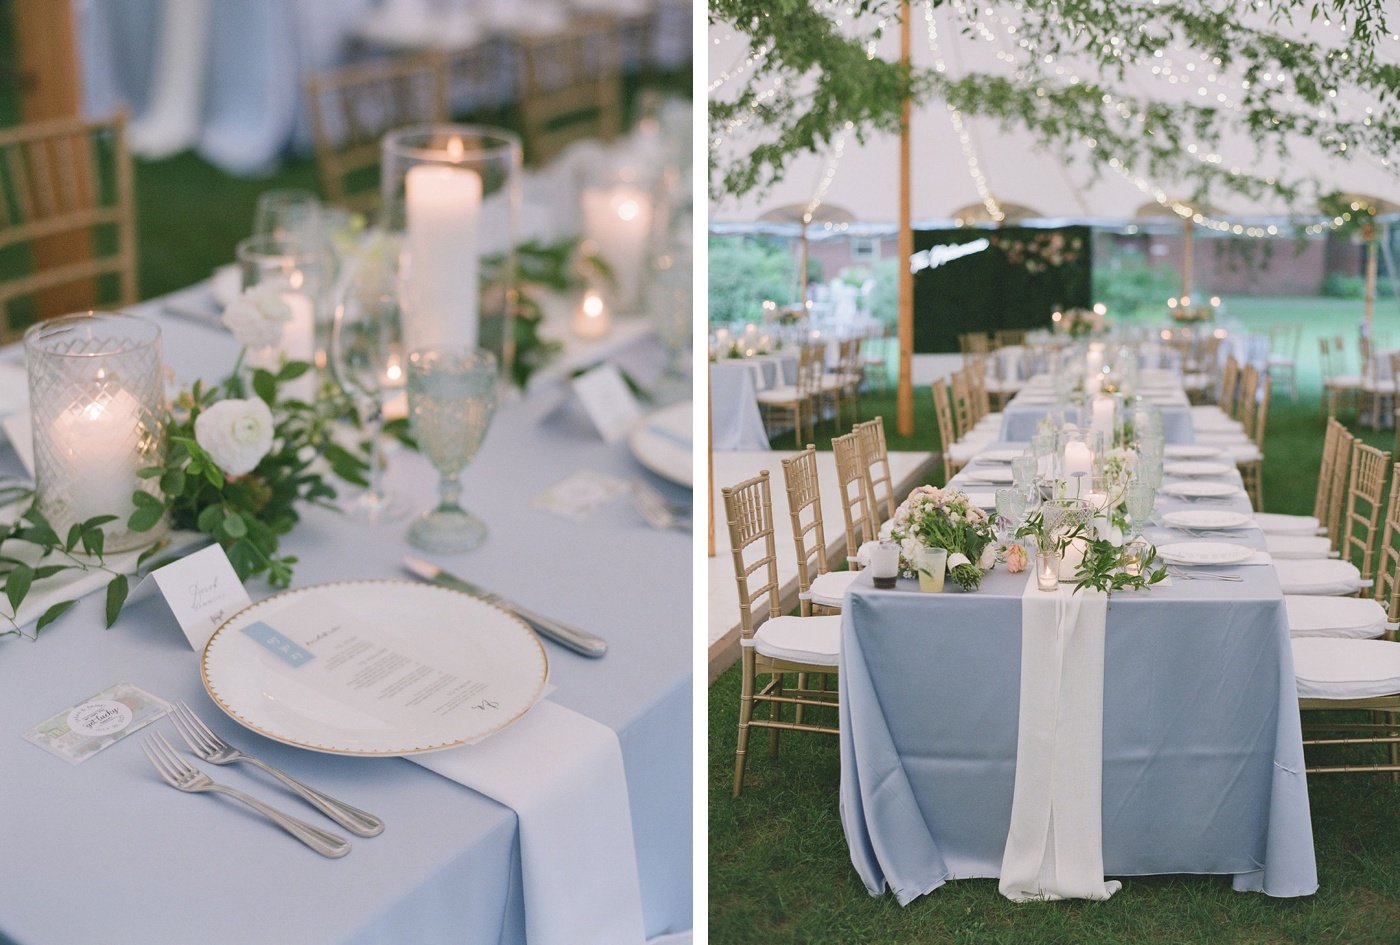 Guest table with a light blue satin tablecloth, greenery garland, and candles at a New England wedding